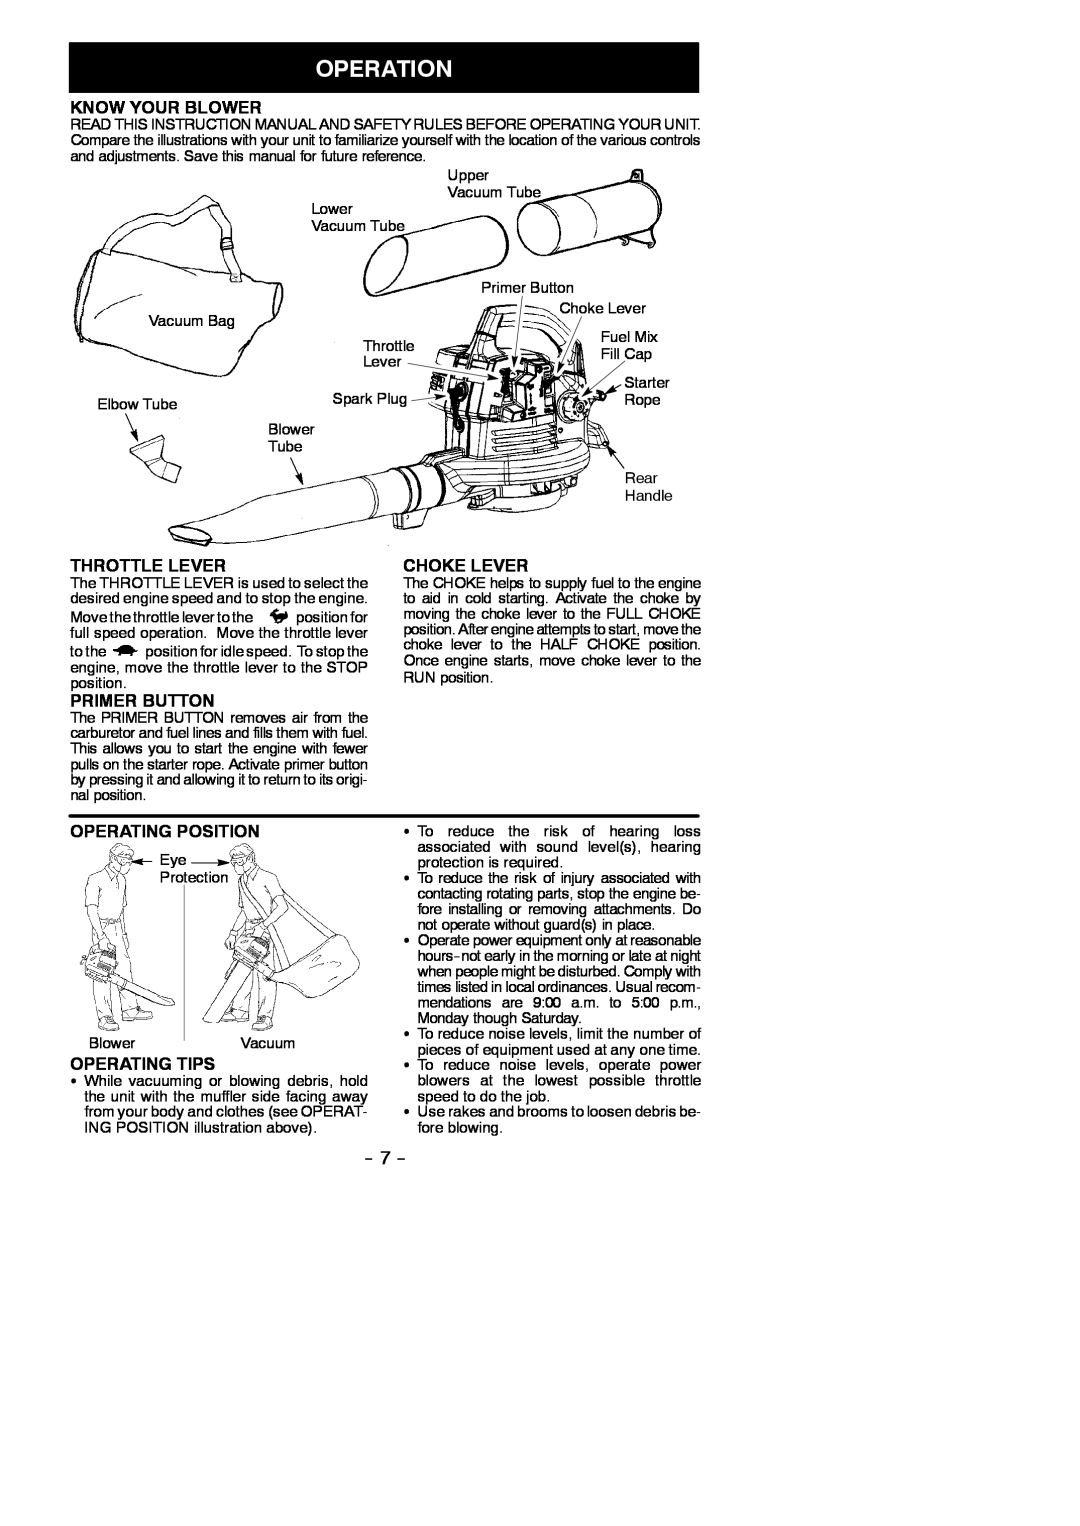 Poulan 545117517 Operation, Know Your Blower, Throttle Lever, Choke Lever, Primer Button, Operating Position 